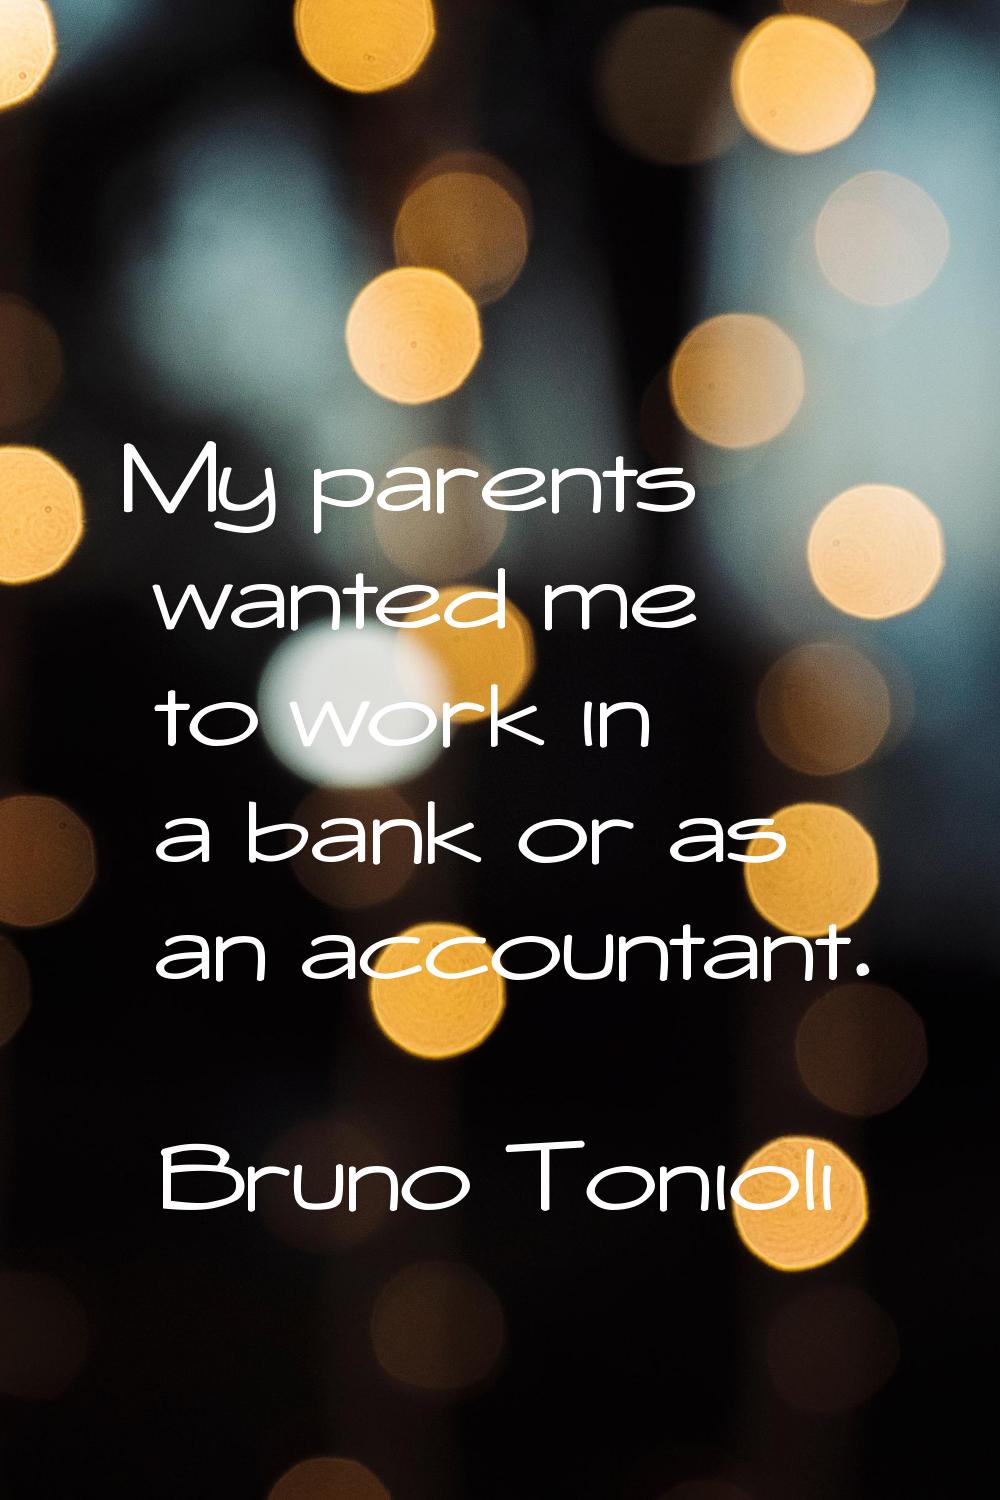 My parents wanted me to work in a bank or as an accountant.